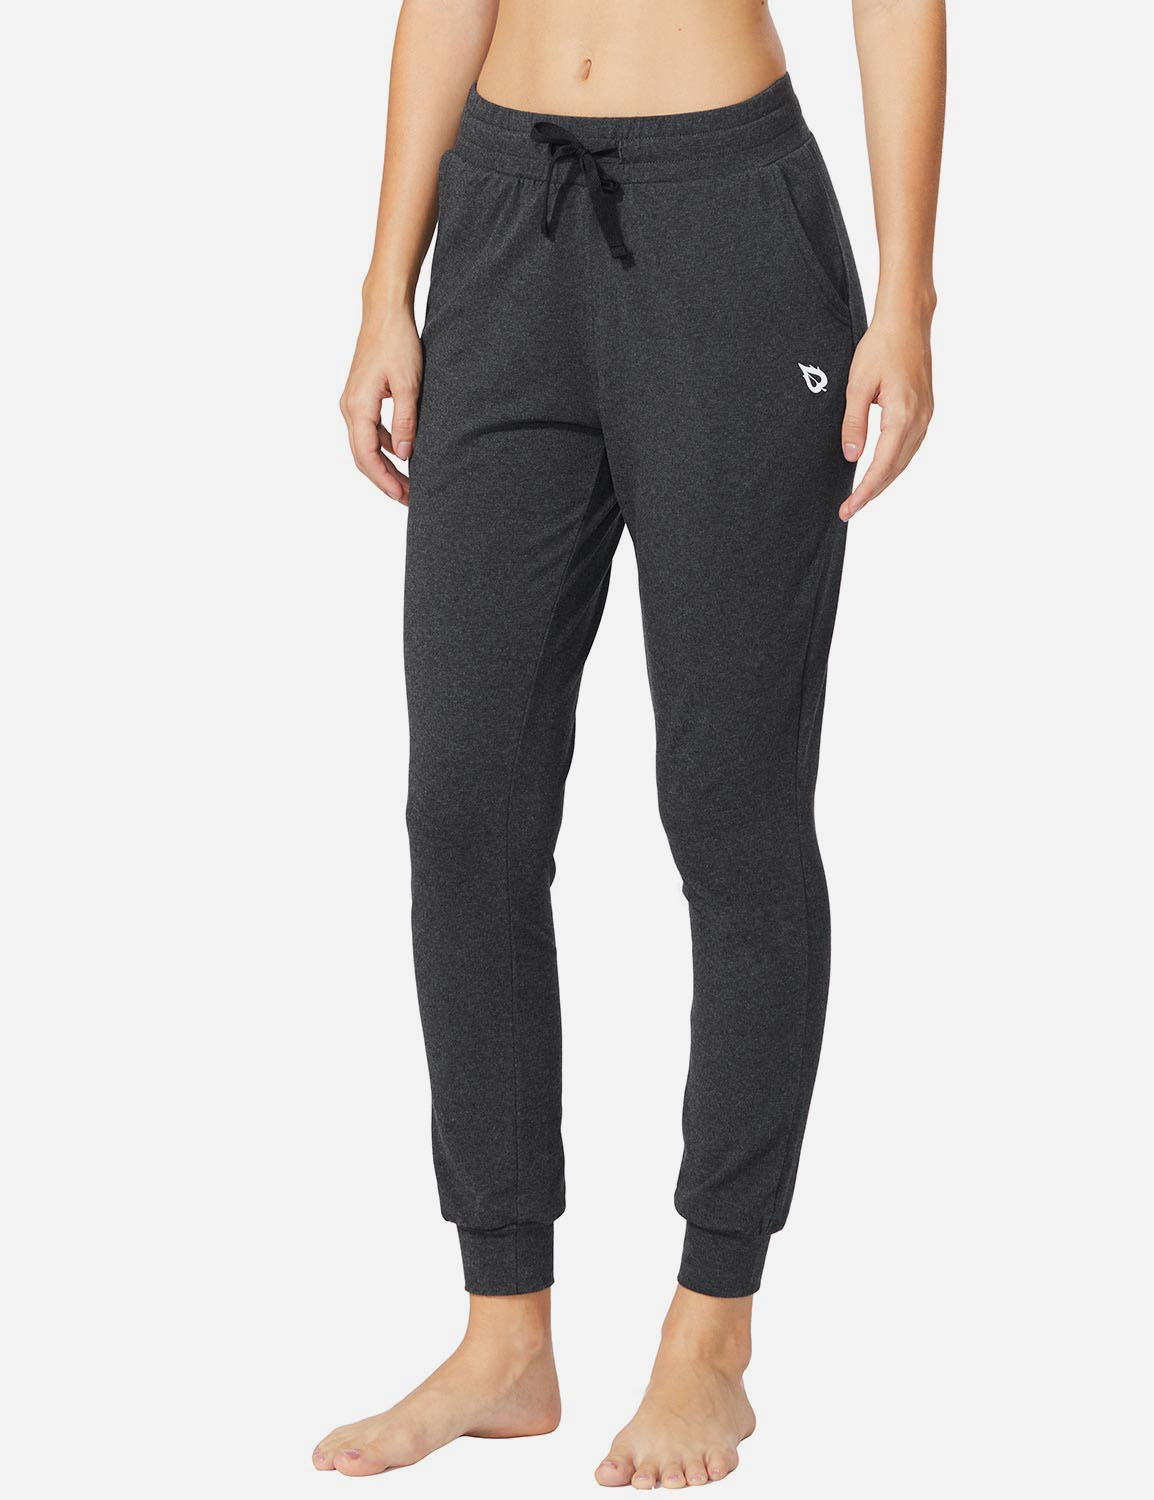 Baleaf Women's Cotton Comfy Pocketed & Tapered Weekend Joggers abh103 Charcoal Front